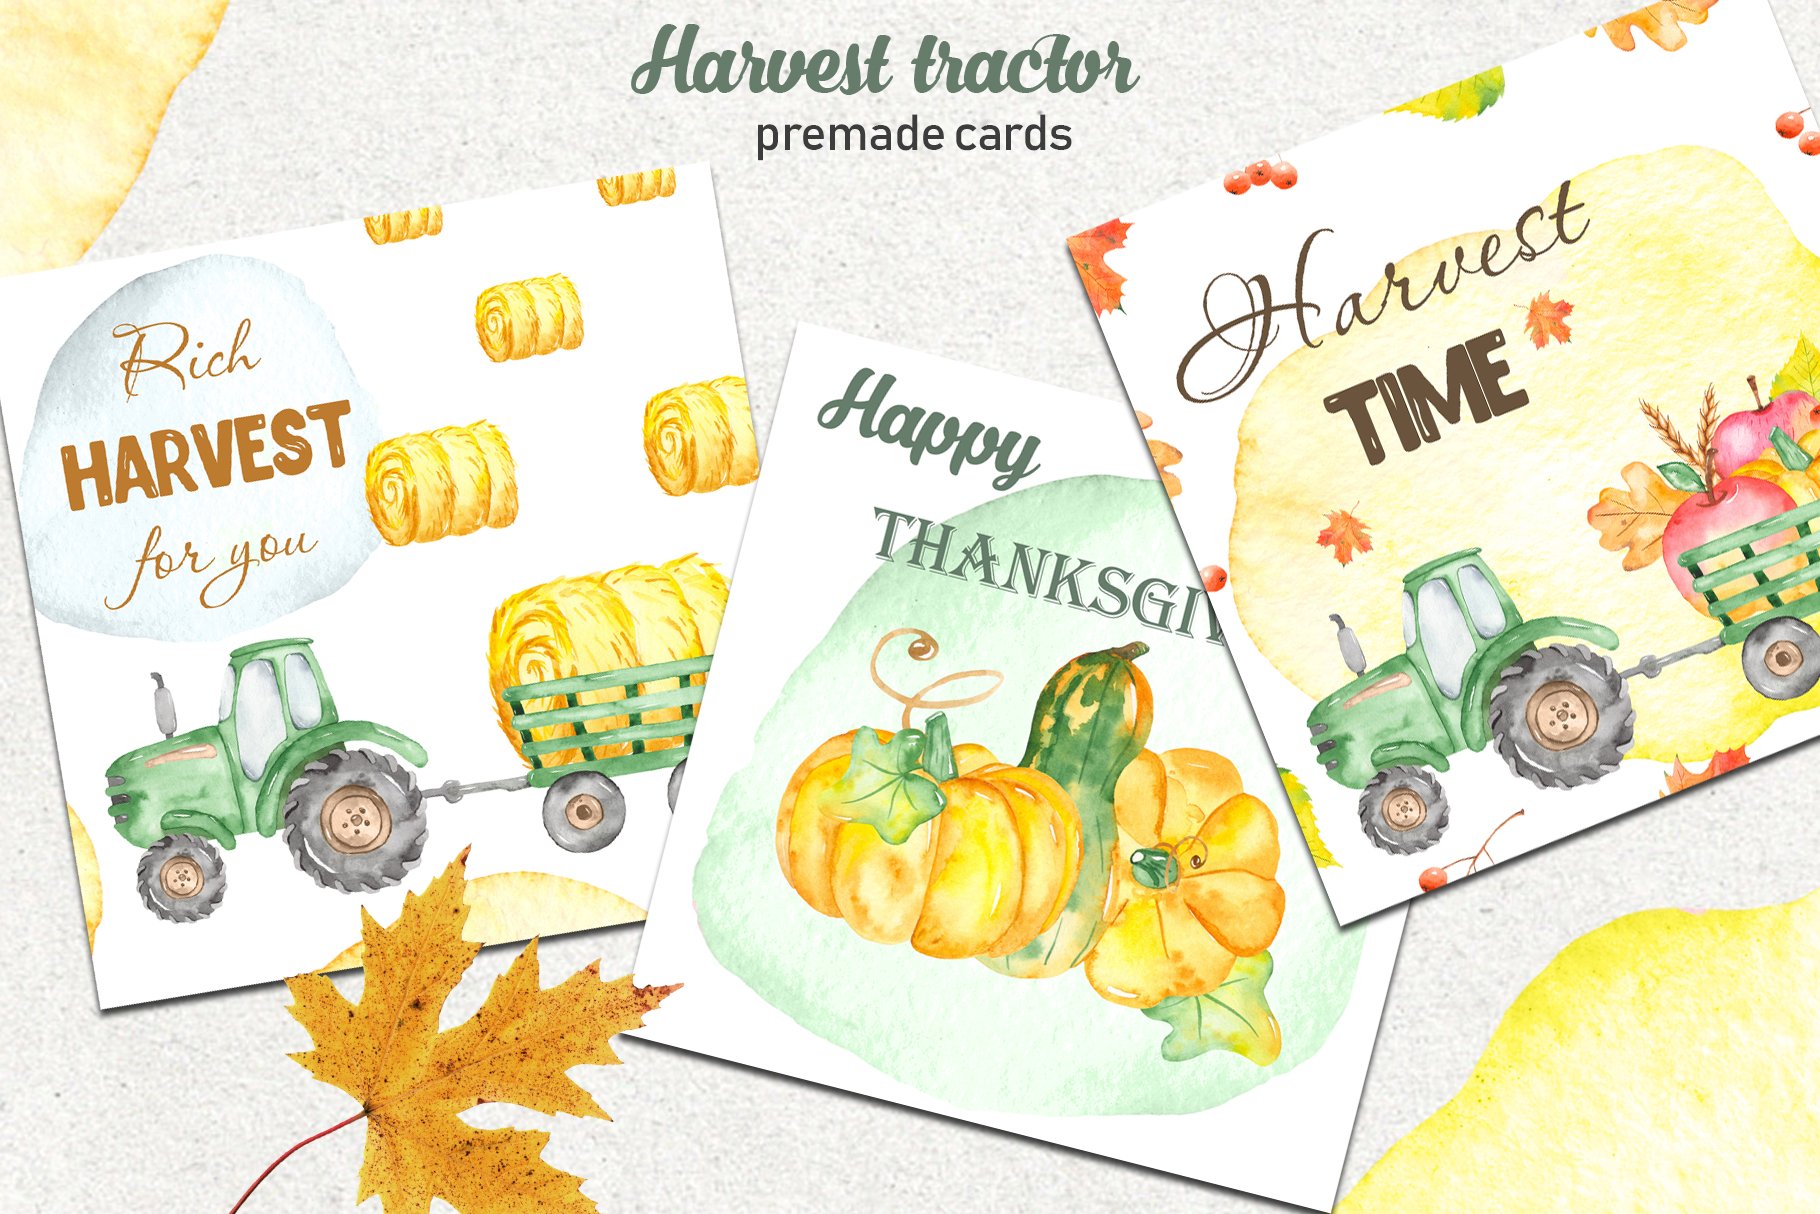 White cards with autumn illustrations.